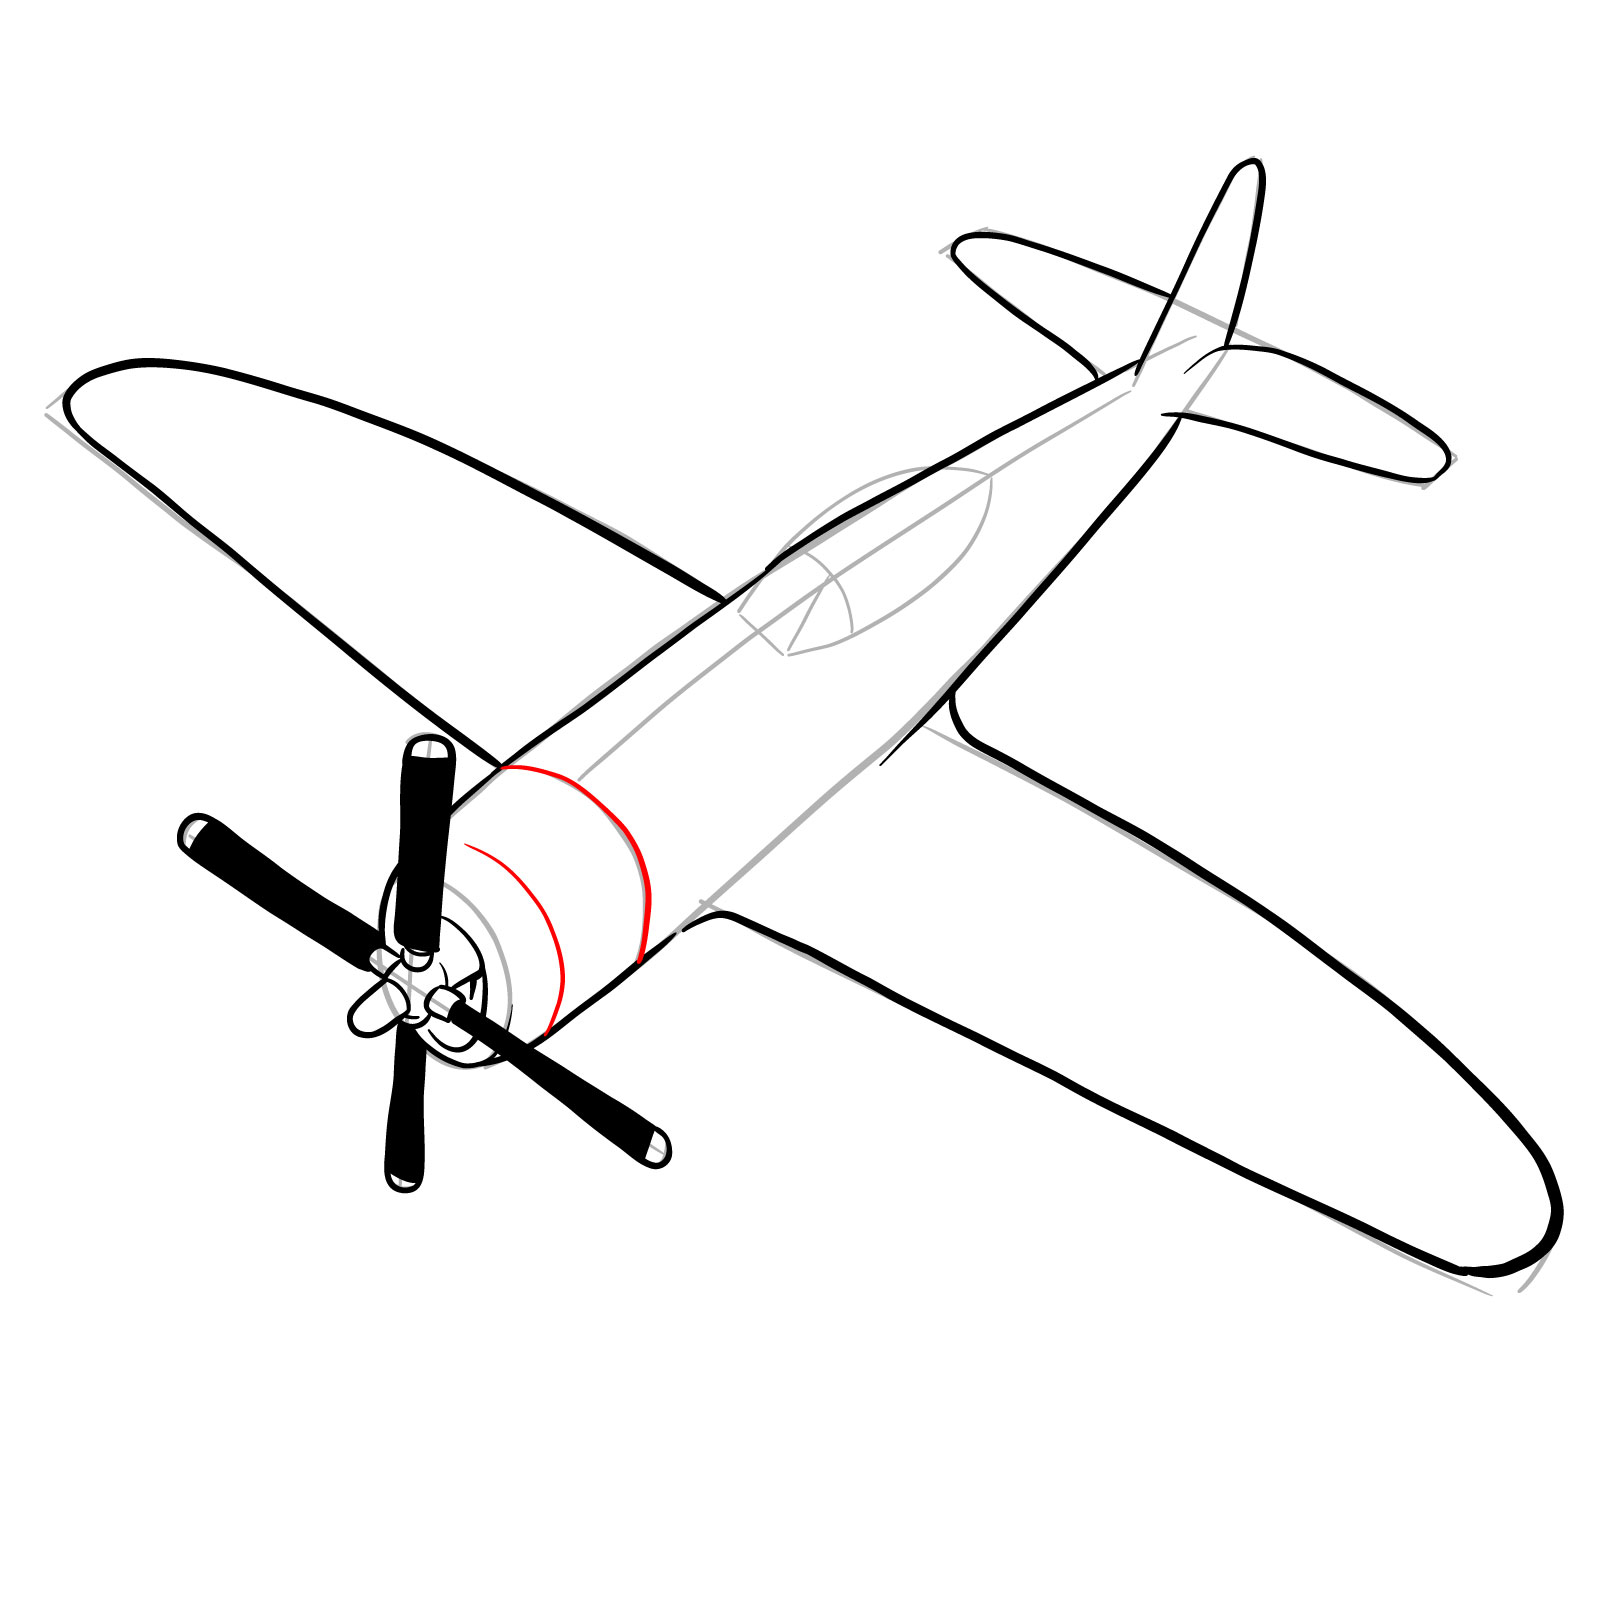 How to draw the Republic P-47 Thunderbolt - step 18